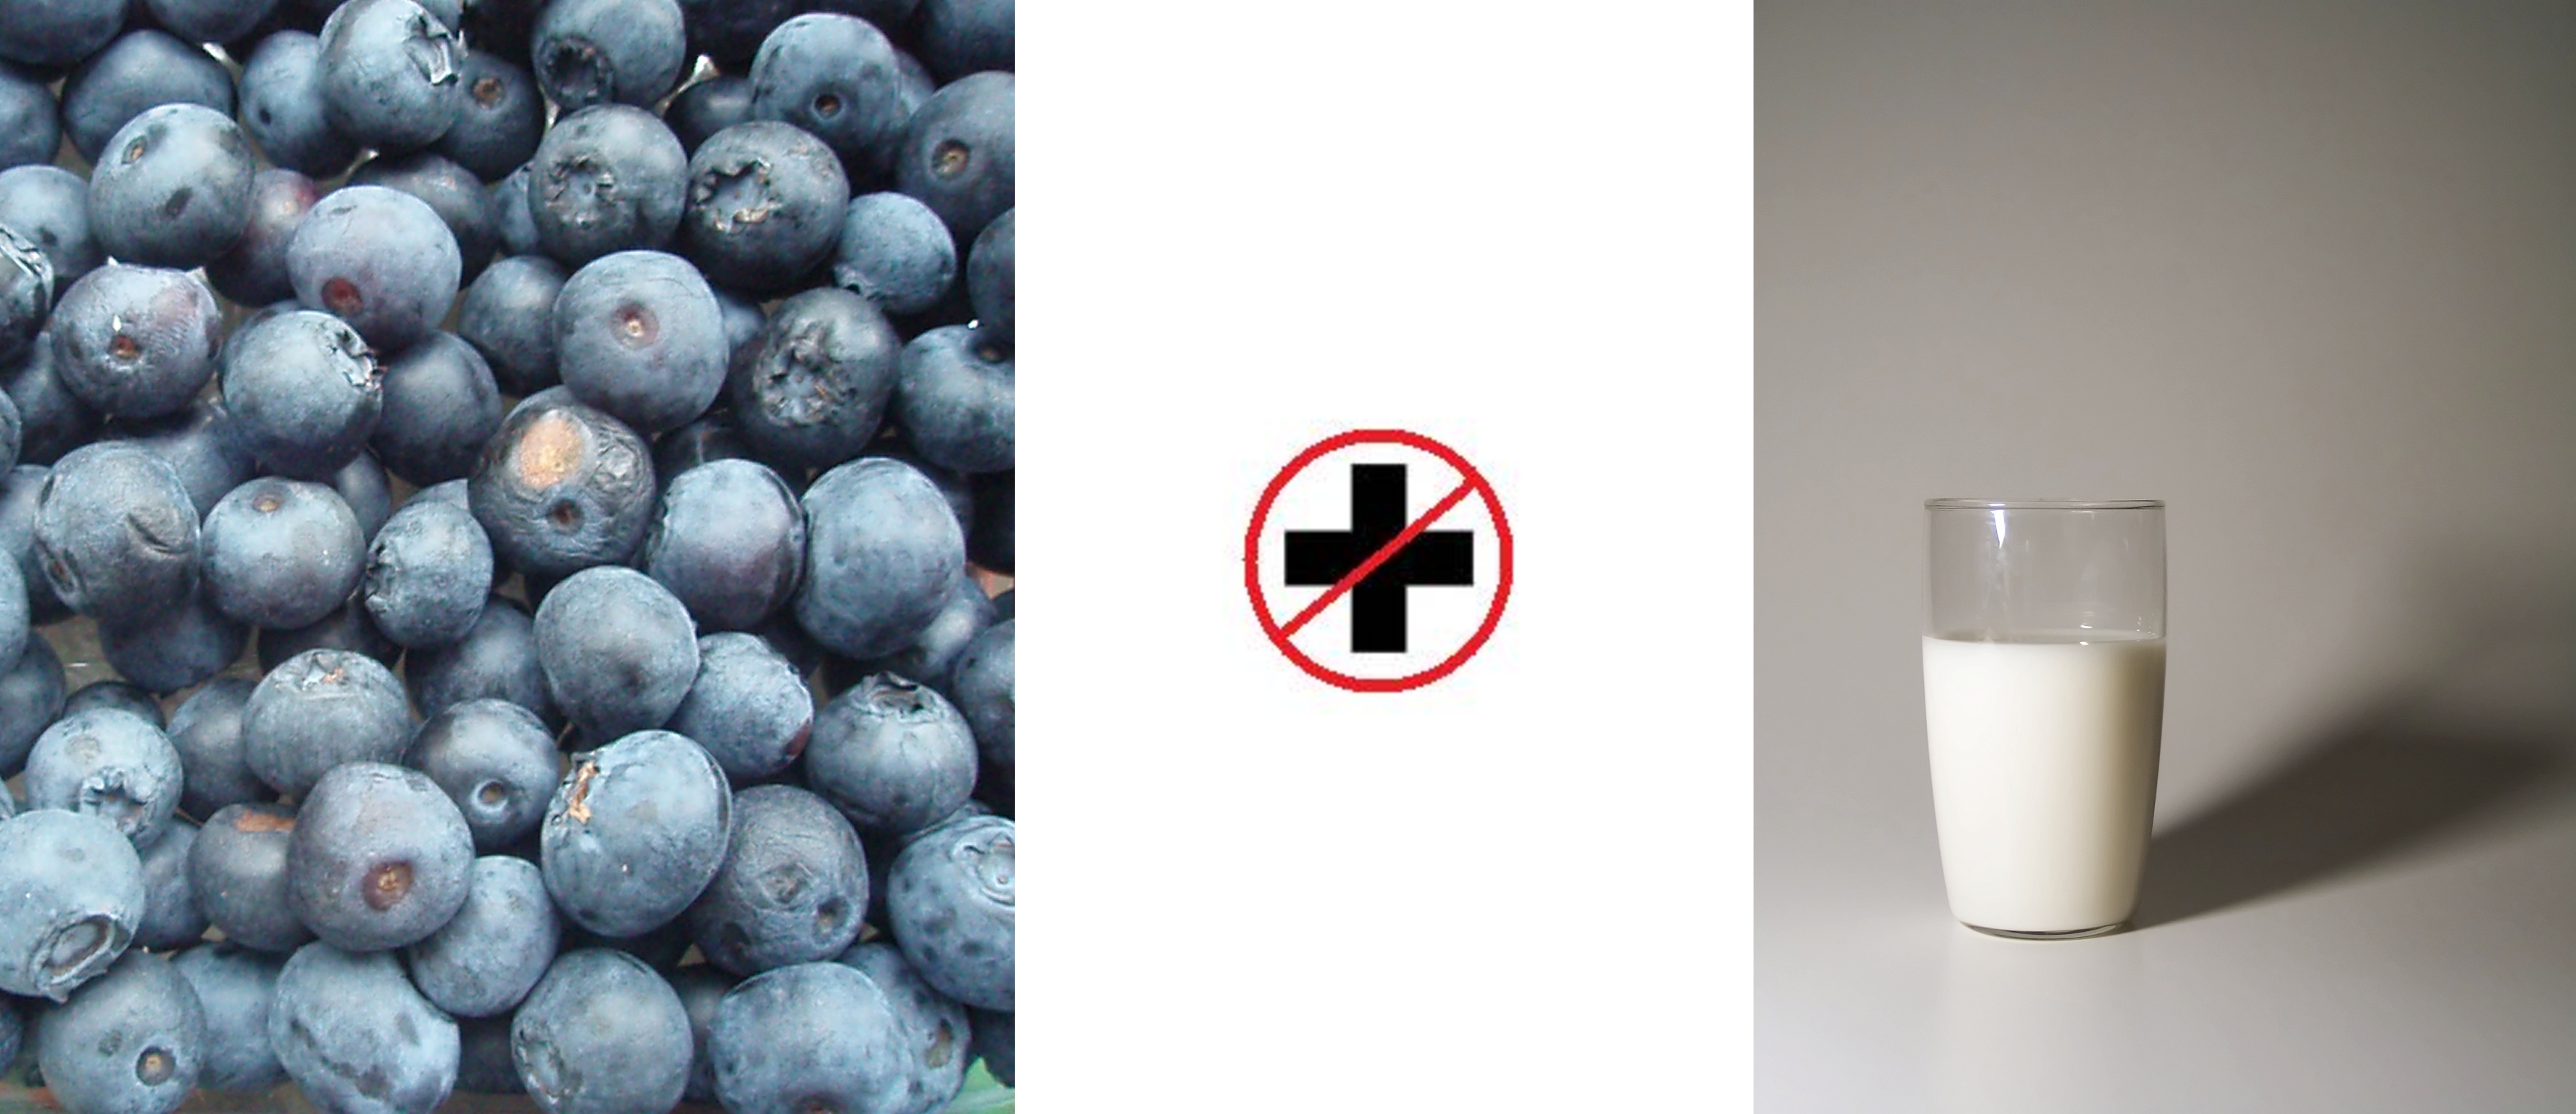 Find out why you probably don't want to mix blueberries with milk or milk proteins like whey or casein.